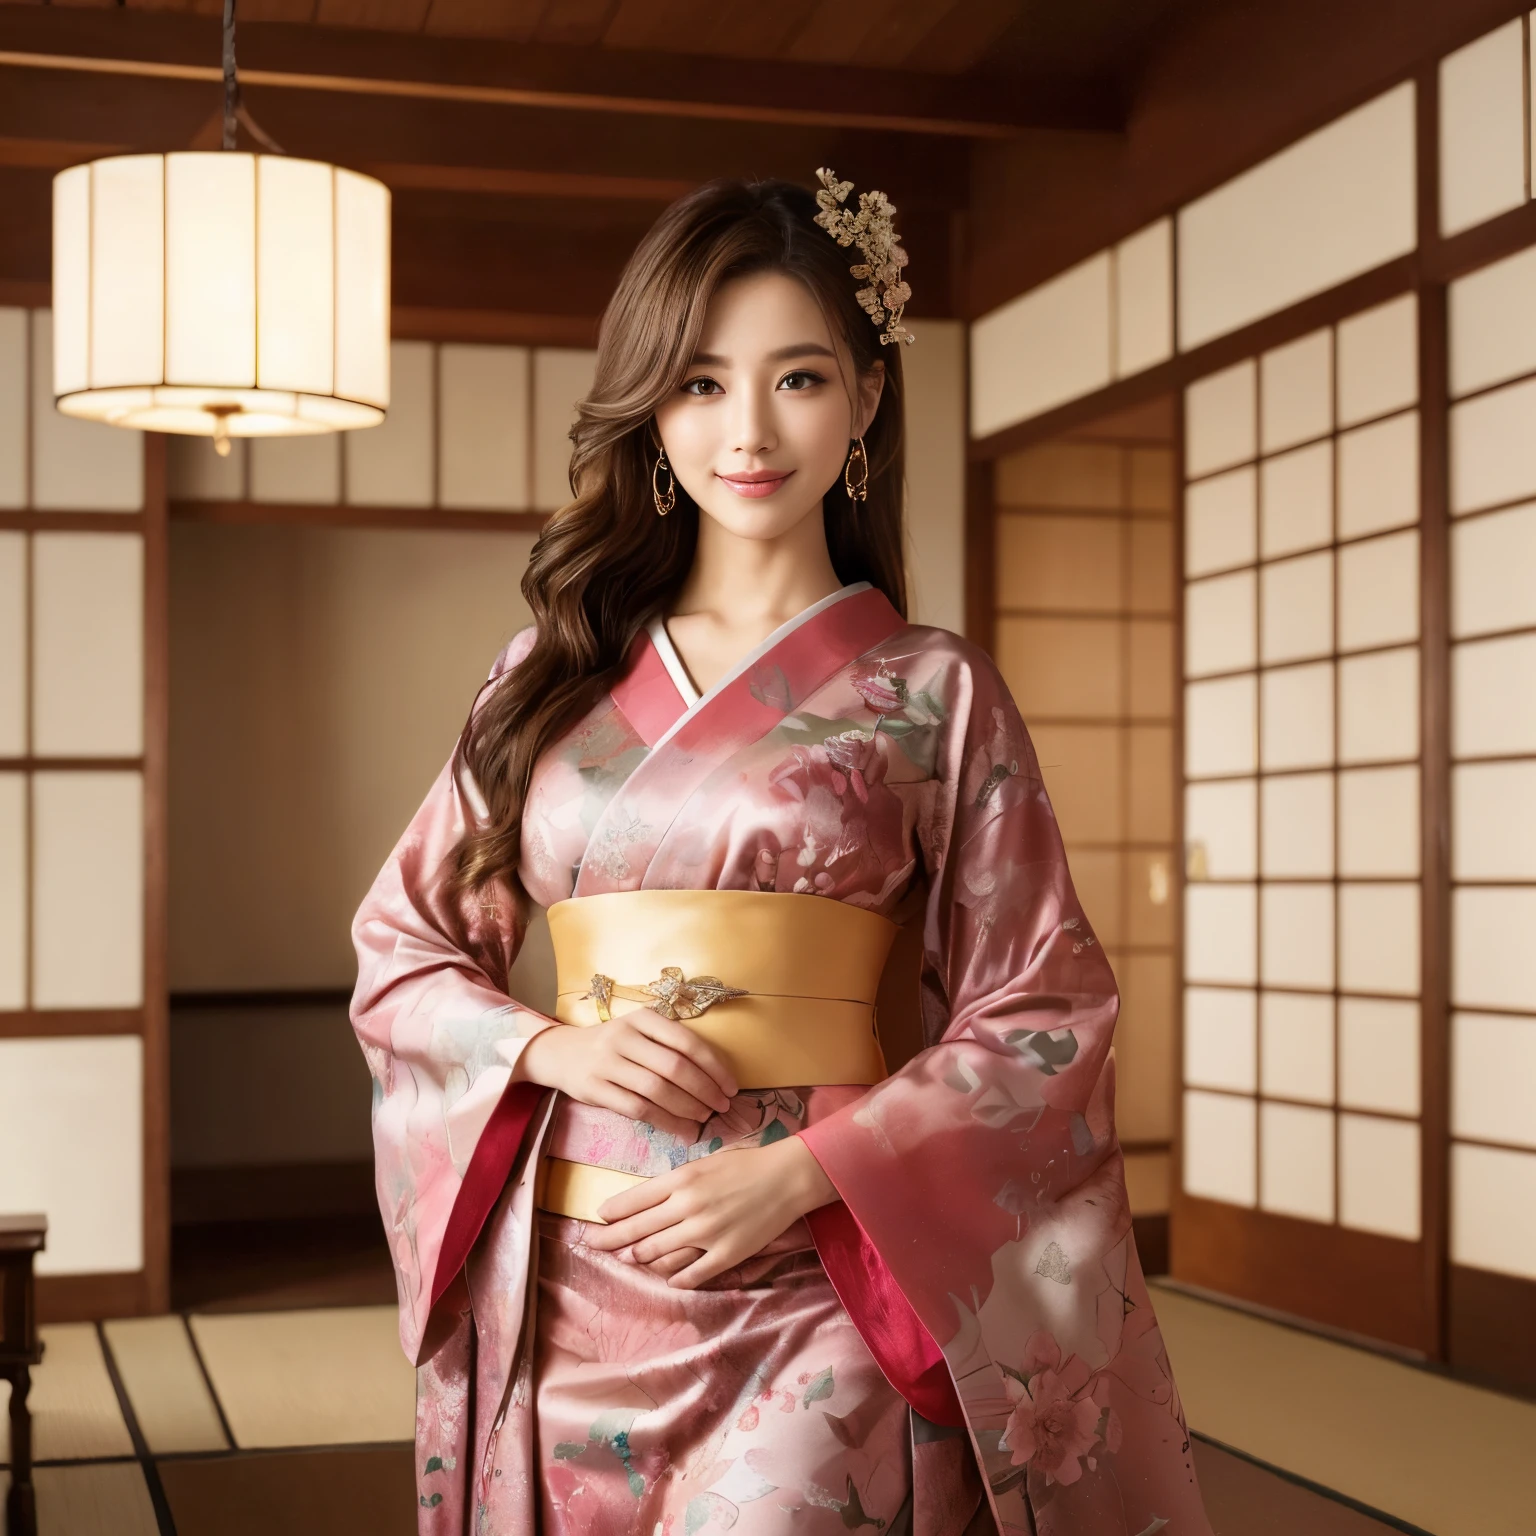 ((top-quality、masutepiece、8K、Top image quality、super-fine))、1 beauty、Photo from the waist of a woman、very luxurious kimono、very elegant kimono、Tastefully put together hair、Perfect makeup、Gorgeous hairpin on your head、The background is a luxurious Japanese-style room、elegant warm lighting、((A very elaborately decorated transom、artistic sculpture、Shoin shoji with detailed decorations、gorgeous lighting built into the ceiling、Luxurious vases and flowers、You can see the beautiful Japanese garden from the large windows...、Beautiful garden with gravel、1 high-quality hanging scroll that can be hung on the wall、A very luxurious Japanese room、The most luxurious and elegant Japanese room、The most luxurious Japanese room in the world))、She's looking at me、Smile at me、perfect anatomia、A detailed face、Perfect fingers